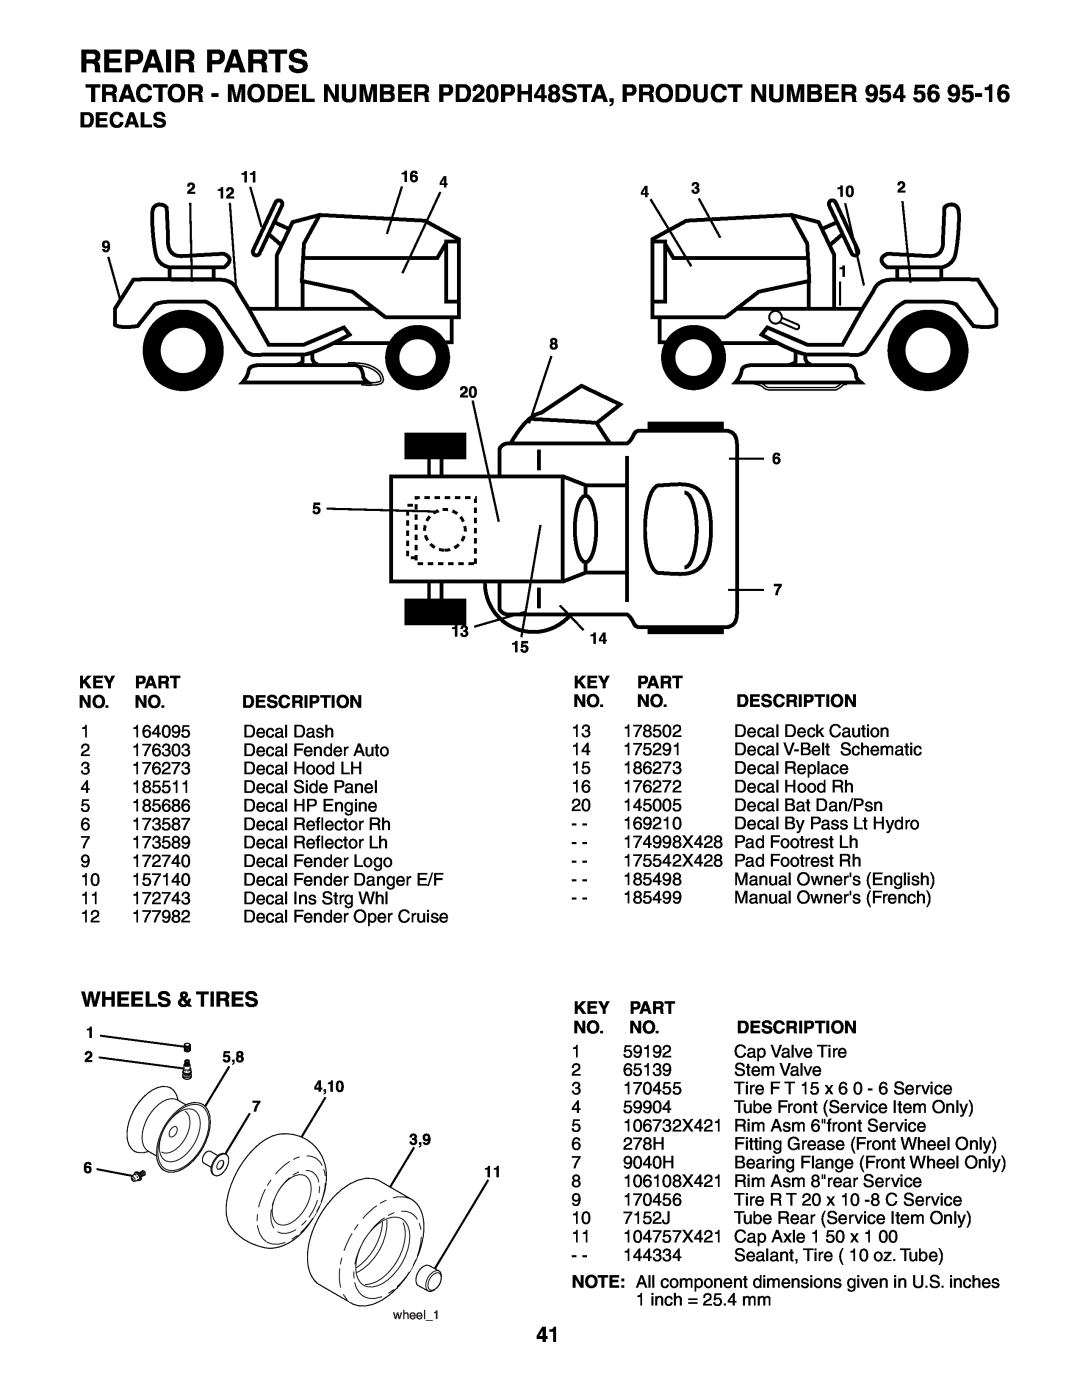 Poulan owner manual Decals, Wheels & Tires, Repair Parts, TRACTOR - MODEL NUMBER PD20PH48STA, PRODUCT NUMBER, 4,10 